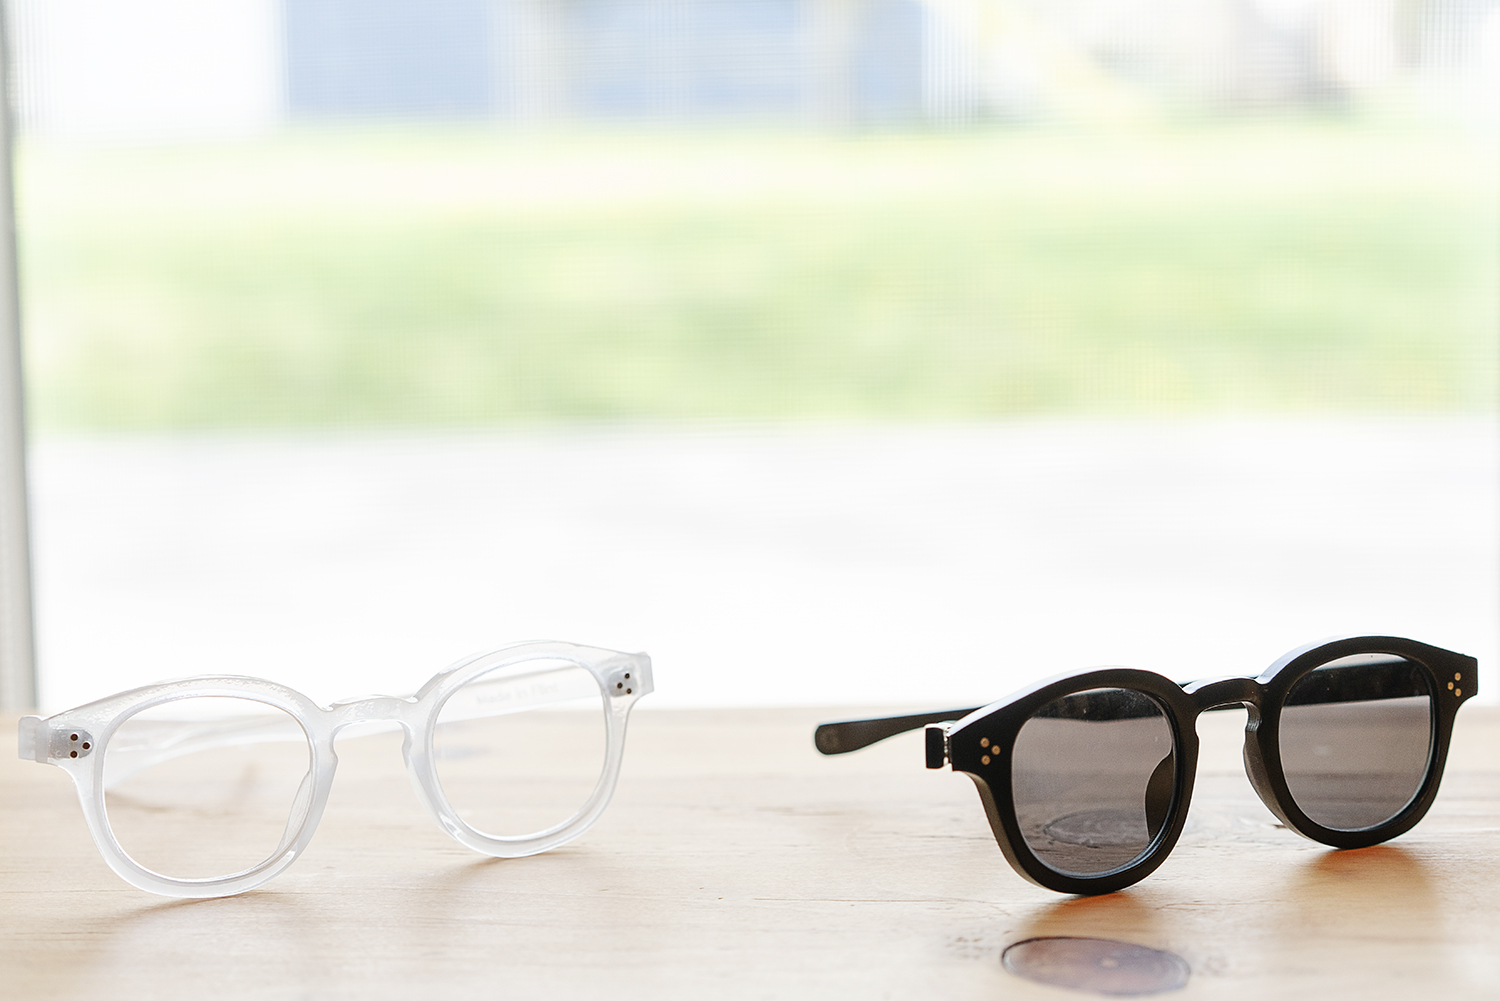 Flint, MI - Wednesday, May 9, 2018: Genusee's first frame style, the Roeper, was "democratically designed" and intended to look good on everyone. The first run will be available in two colors with either single-prescription or tinted lenses.